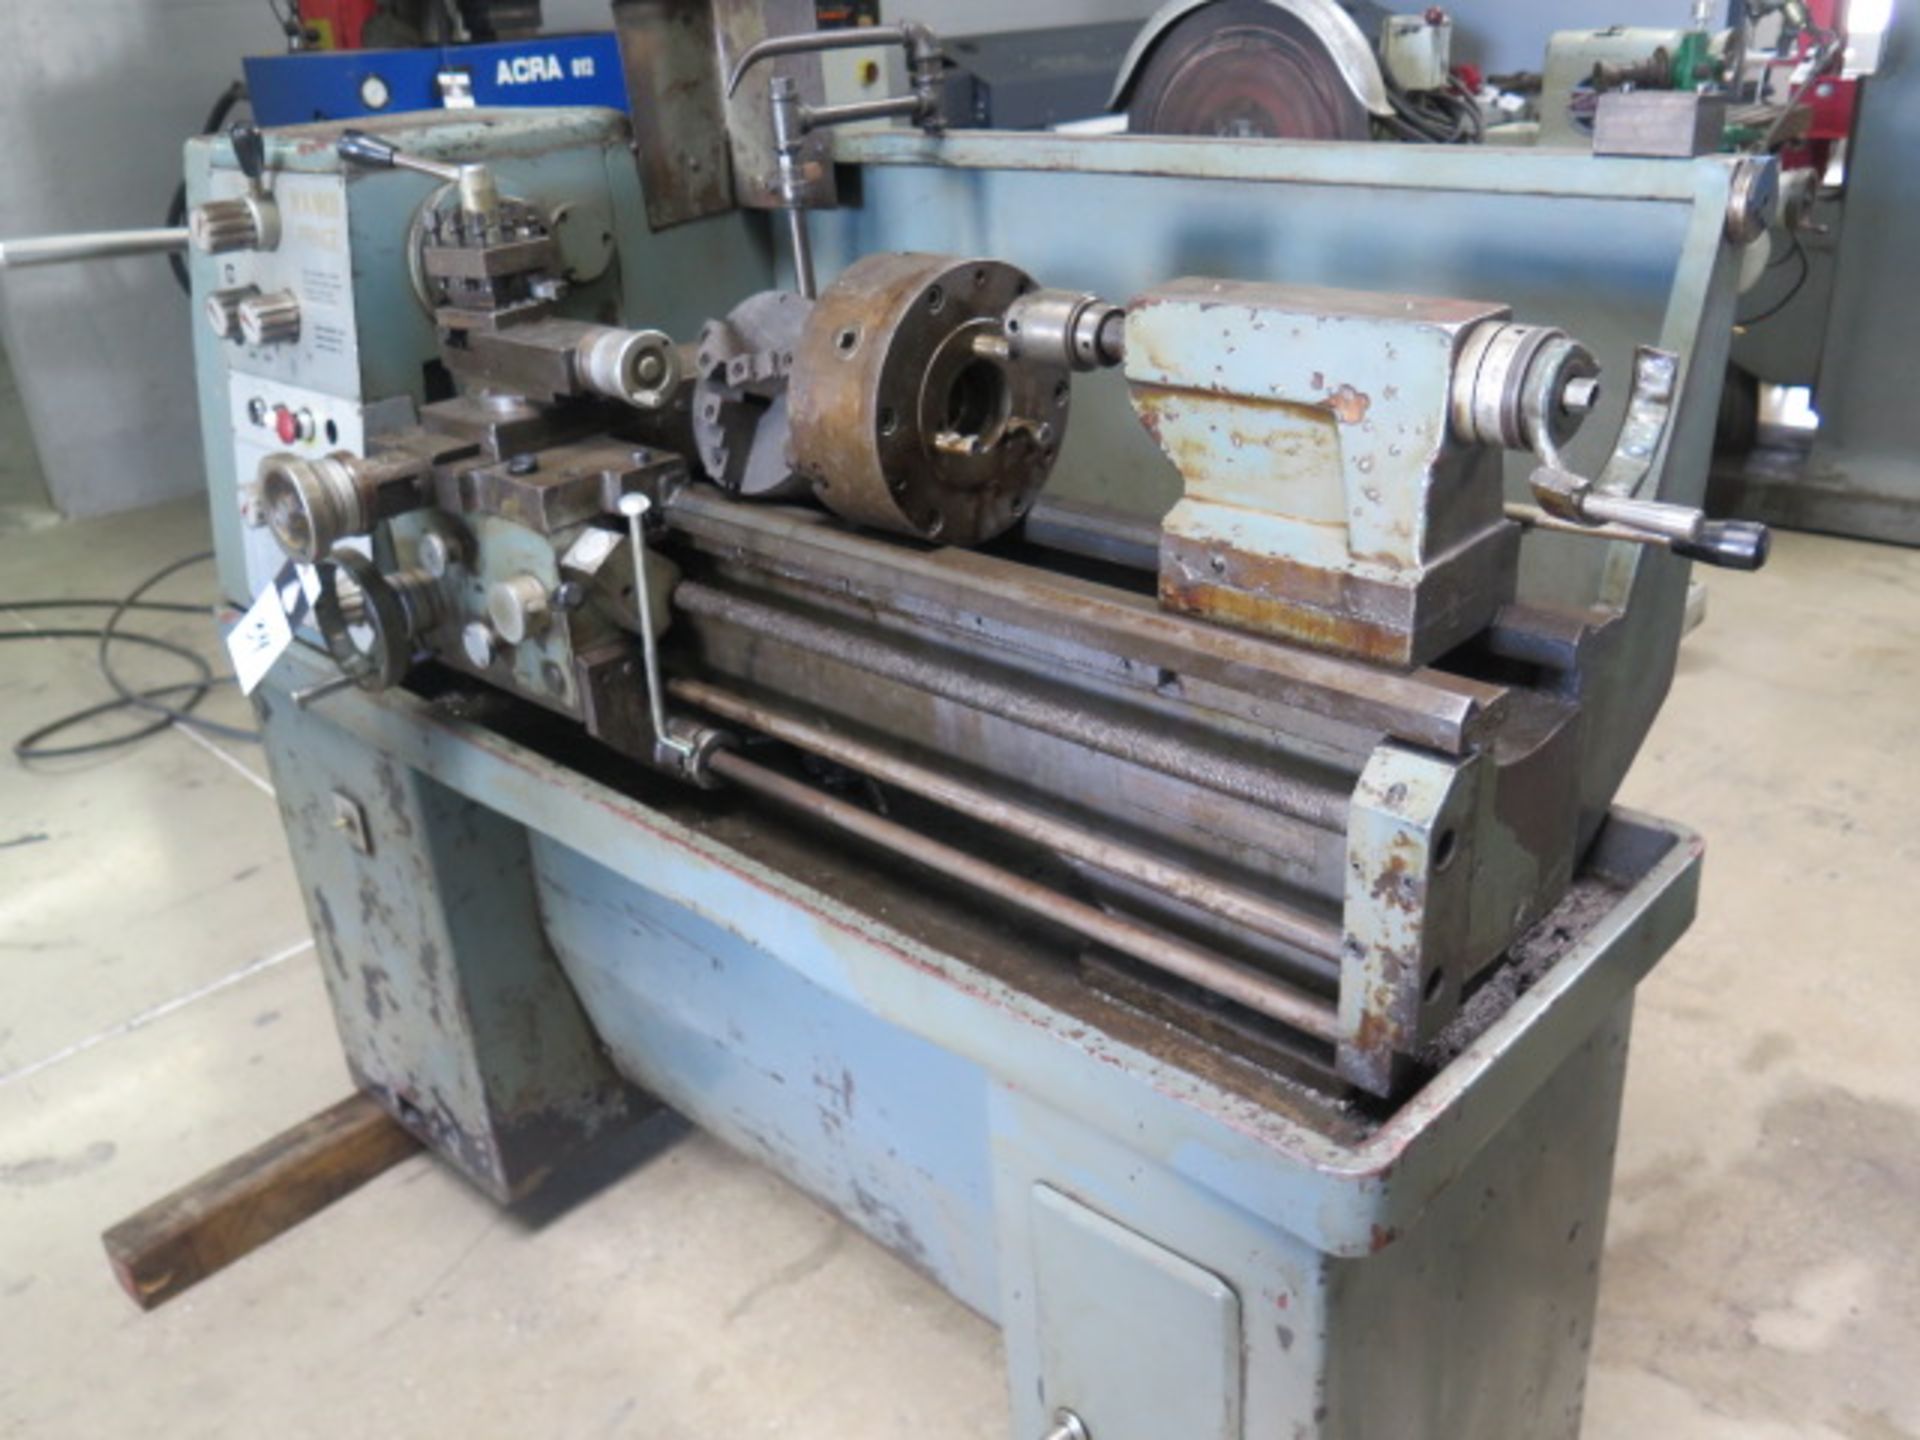 Ramco "Prince" 11" x 30" Geared Head Lathe s/n 4064 w/ 105-2000 RPM, Inch/mm Threading, Tailstock, - Image 3 of 17